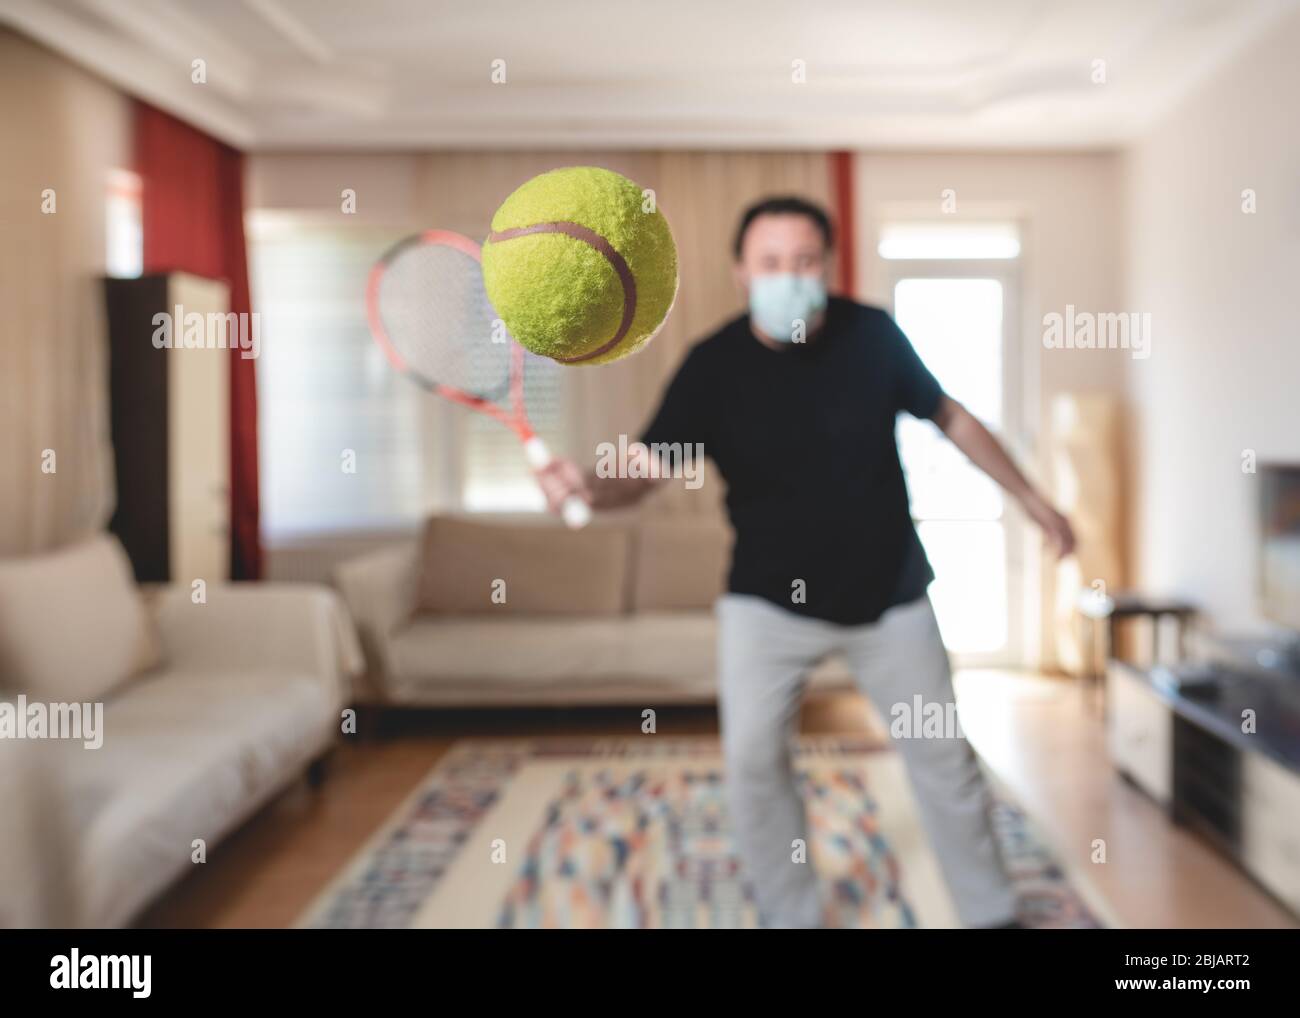 Man with protective medical mask playing tennis at home in the Covid-19 Coronavirus outbreak quarantine. Stock Photo